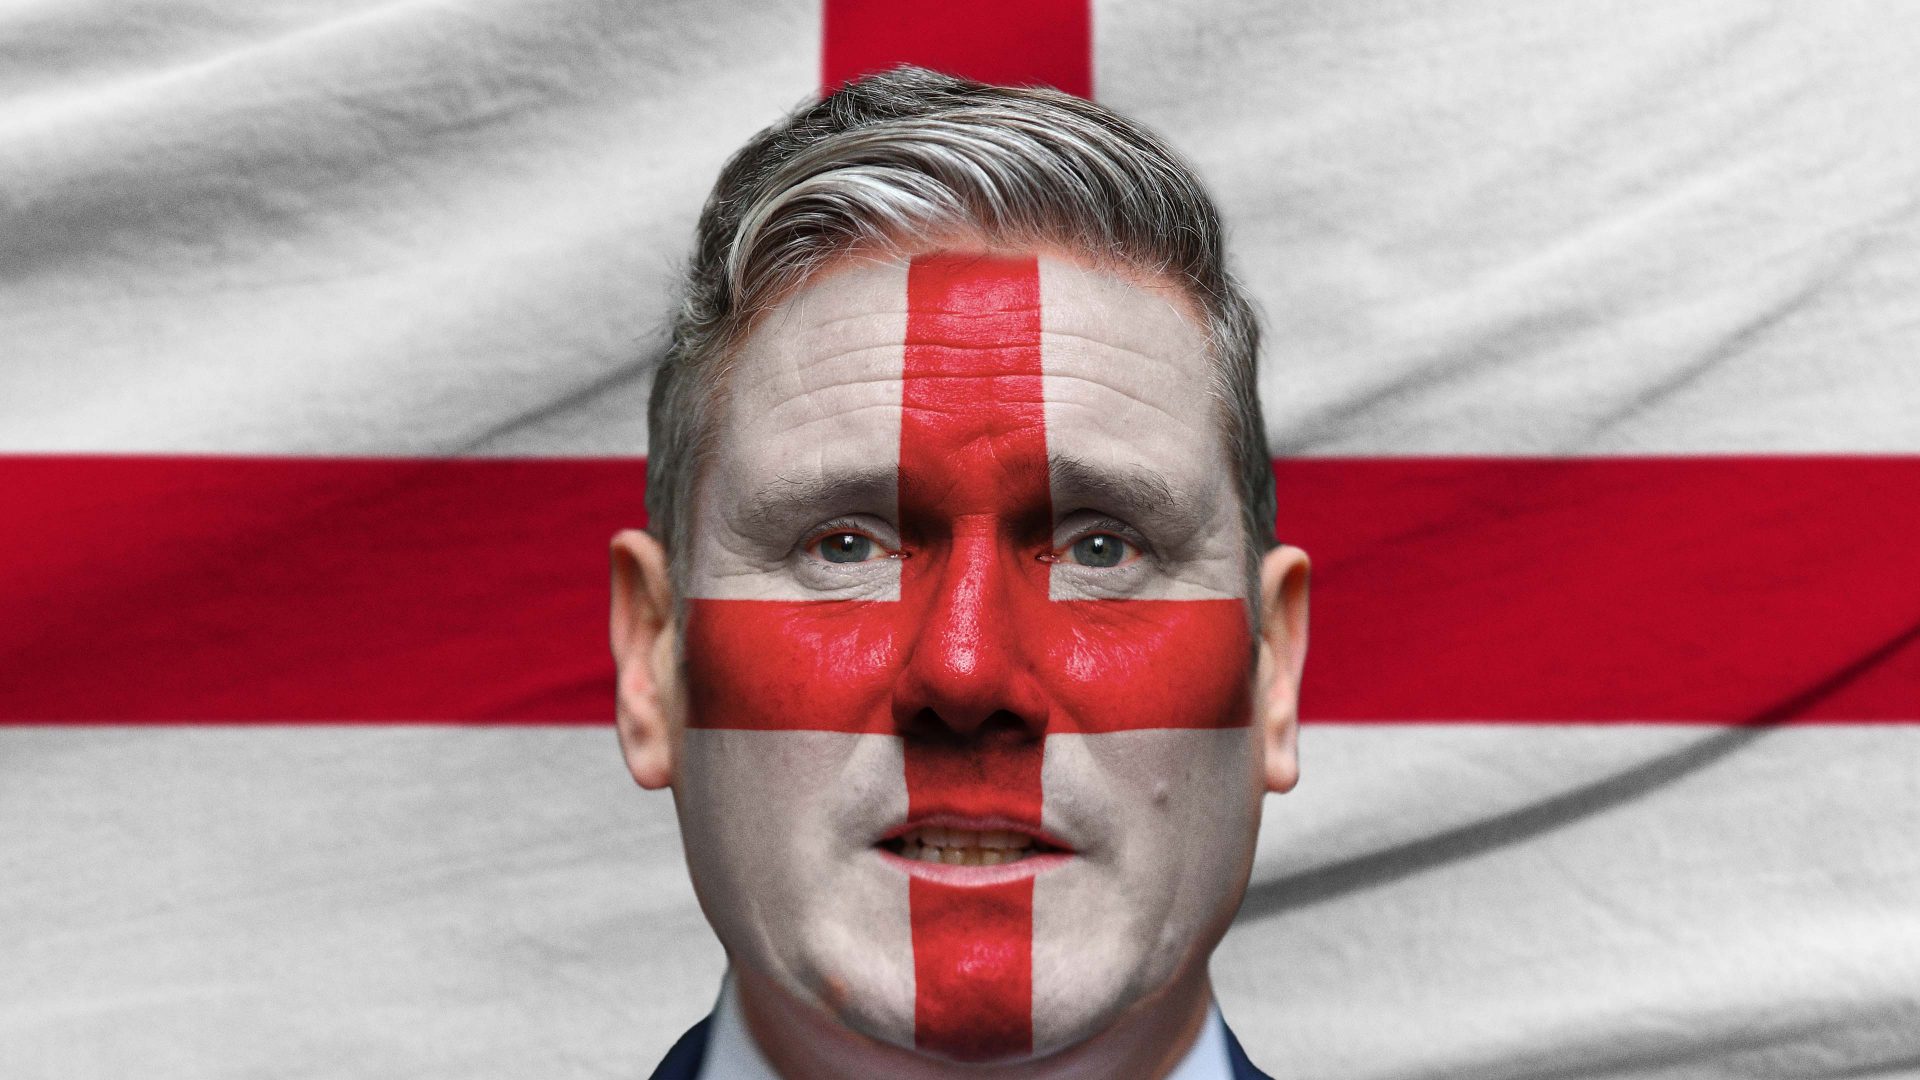 Keir Starmer’s focus on patriotism in more everyday aspects of English life, including supporting the national football teams, may resonate more deeply with the country’s diverse population. Image: The New European